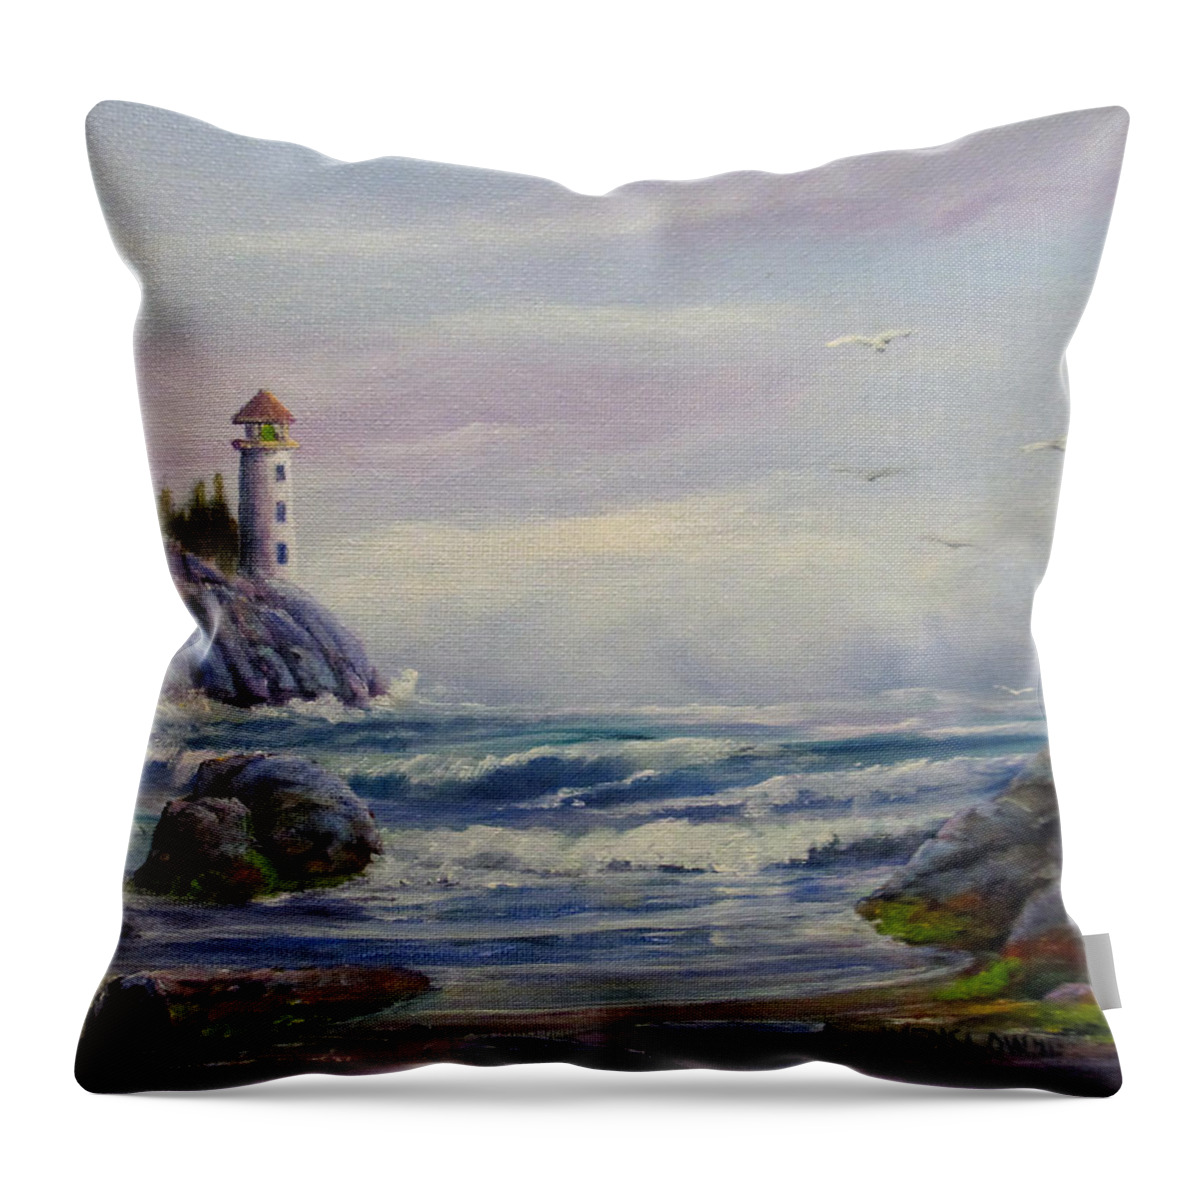 Seascape Throw Pillow featuring the painting Fantasy Beach by Wayne Enslow